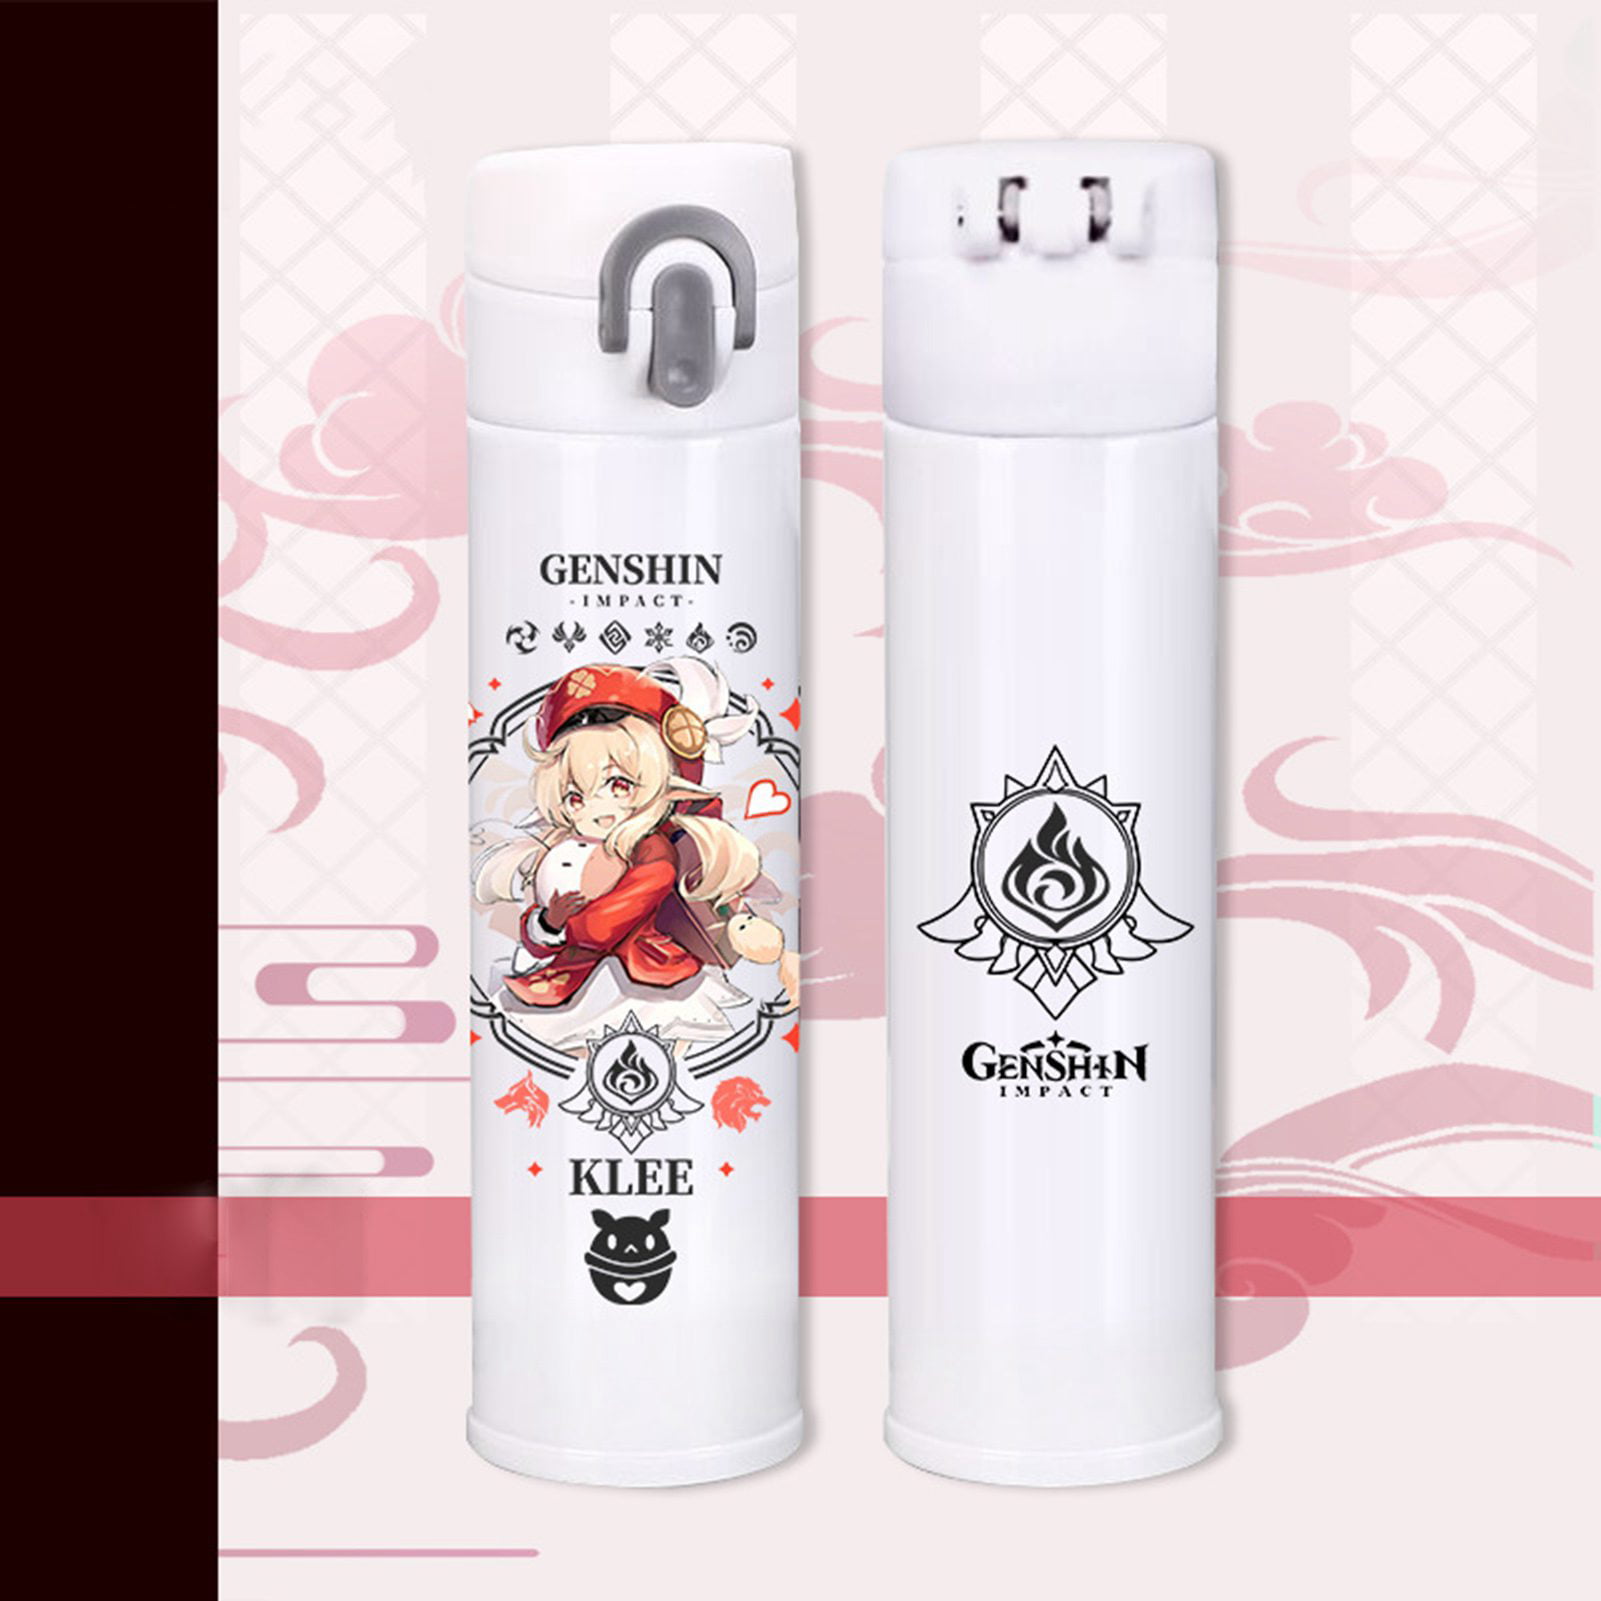 Anime DARLING in the FRANXX Thermos Cup Stainless Steel water Bottle 450ml  #D5